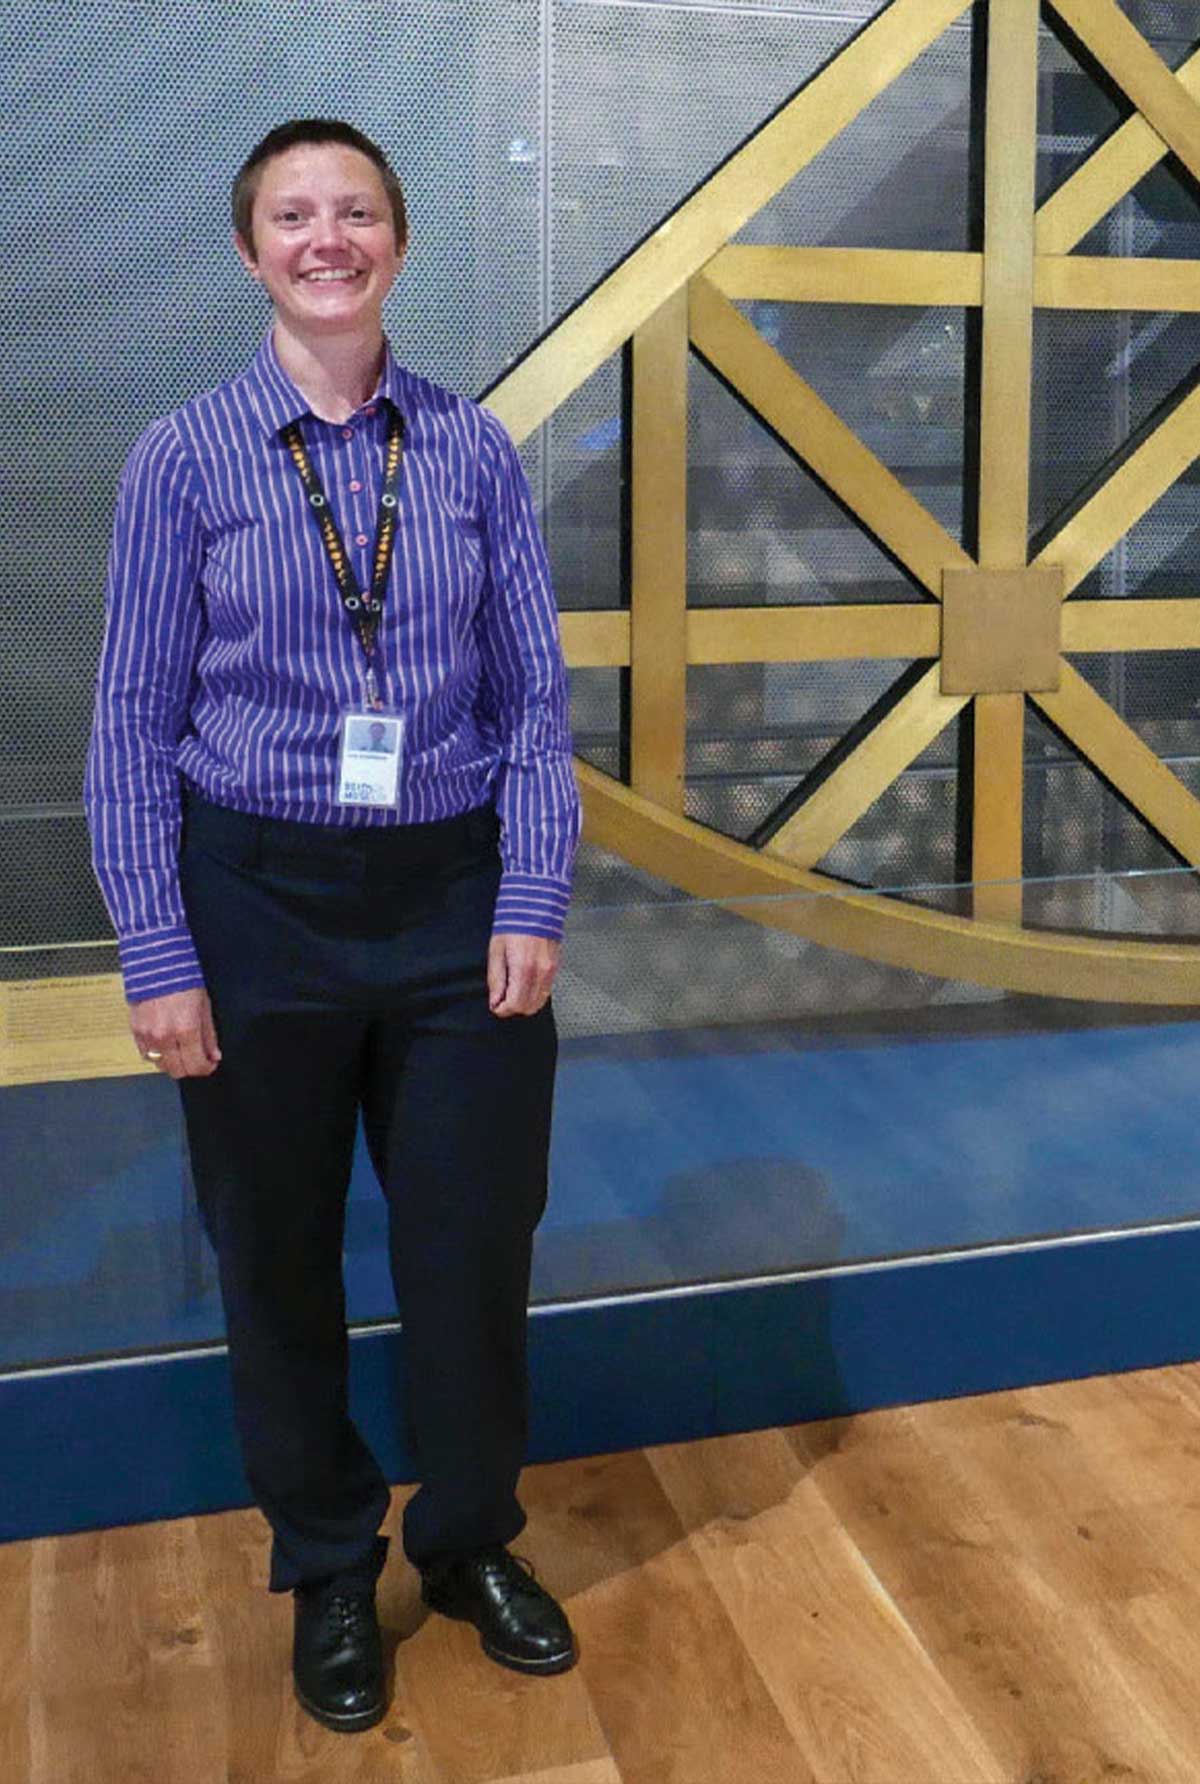 Smiling young woman with short brown hair wearing a striped purple, tucked-in shirt and black pants and shoes standing in front of a large scientific instrument